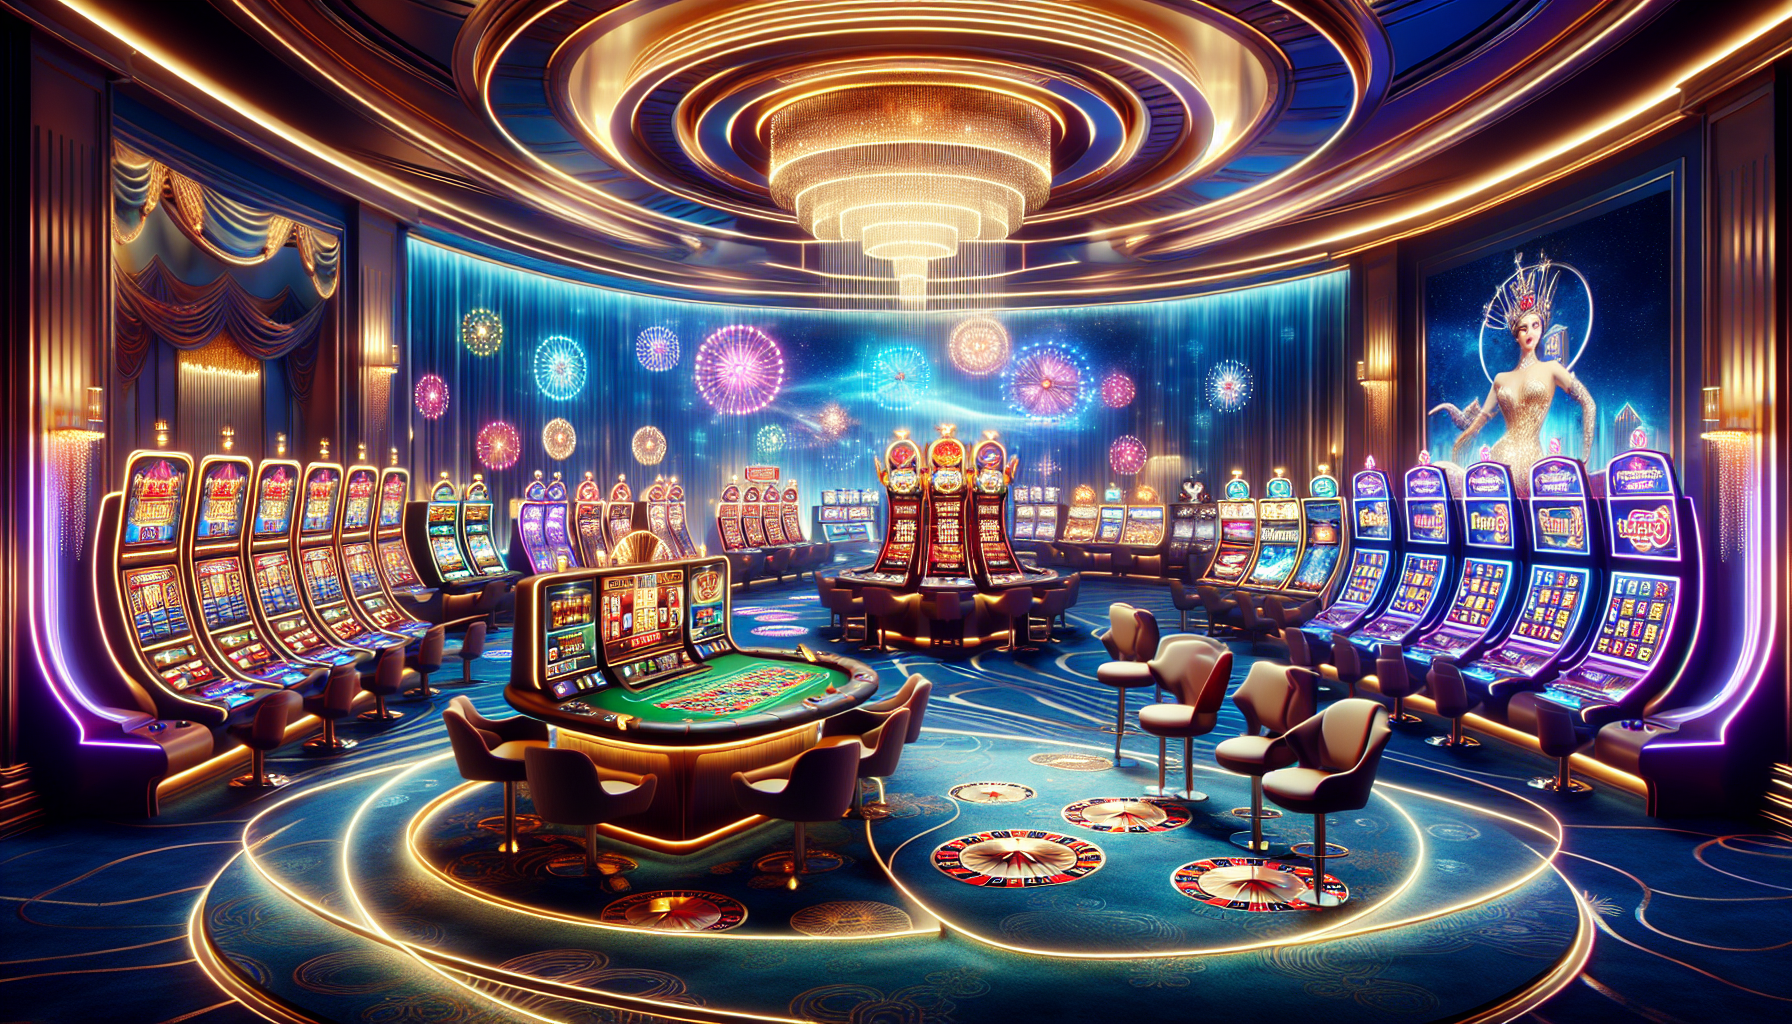 Navigating the glitz and strategy of the casino scene